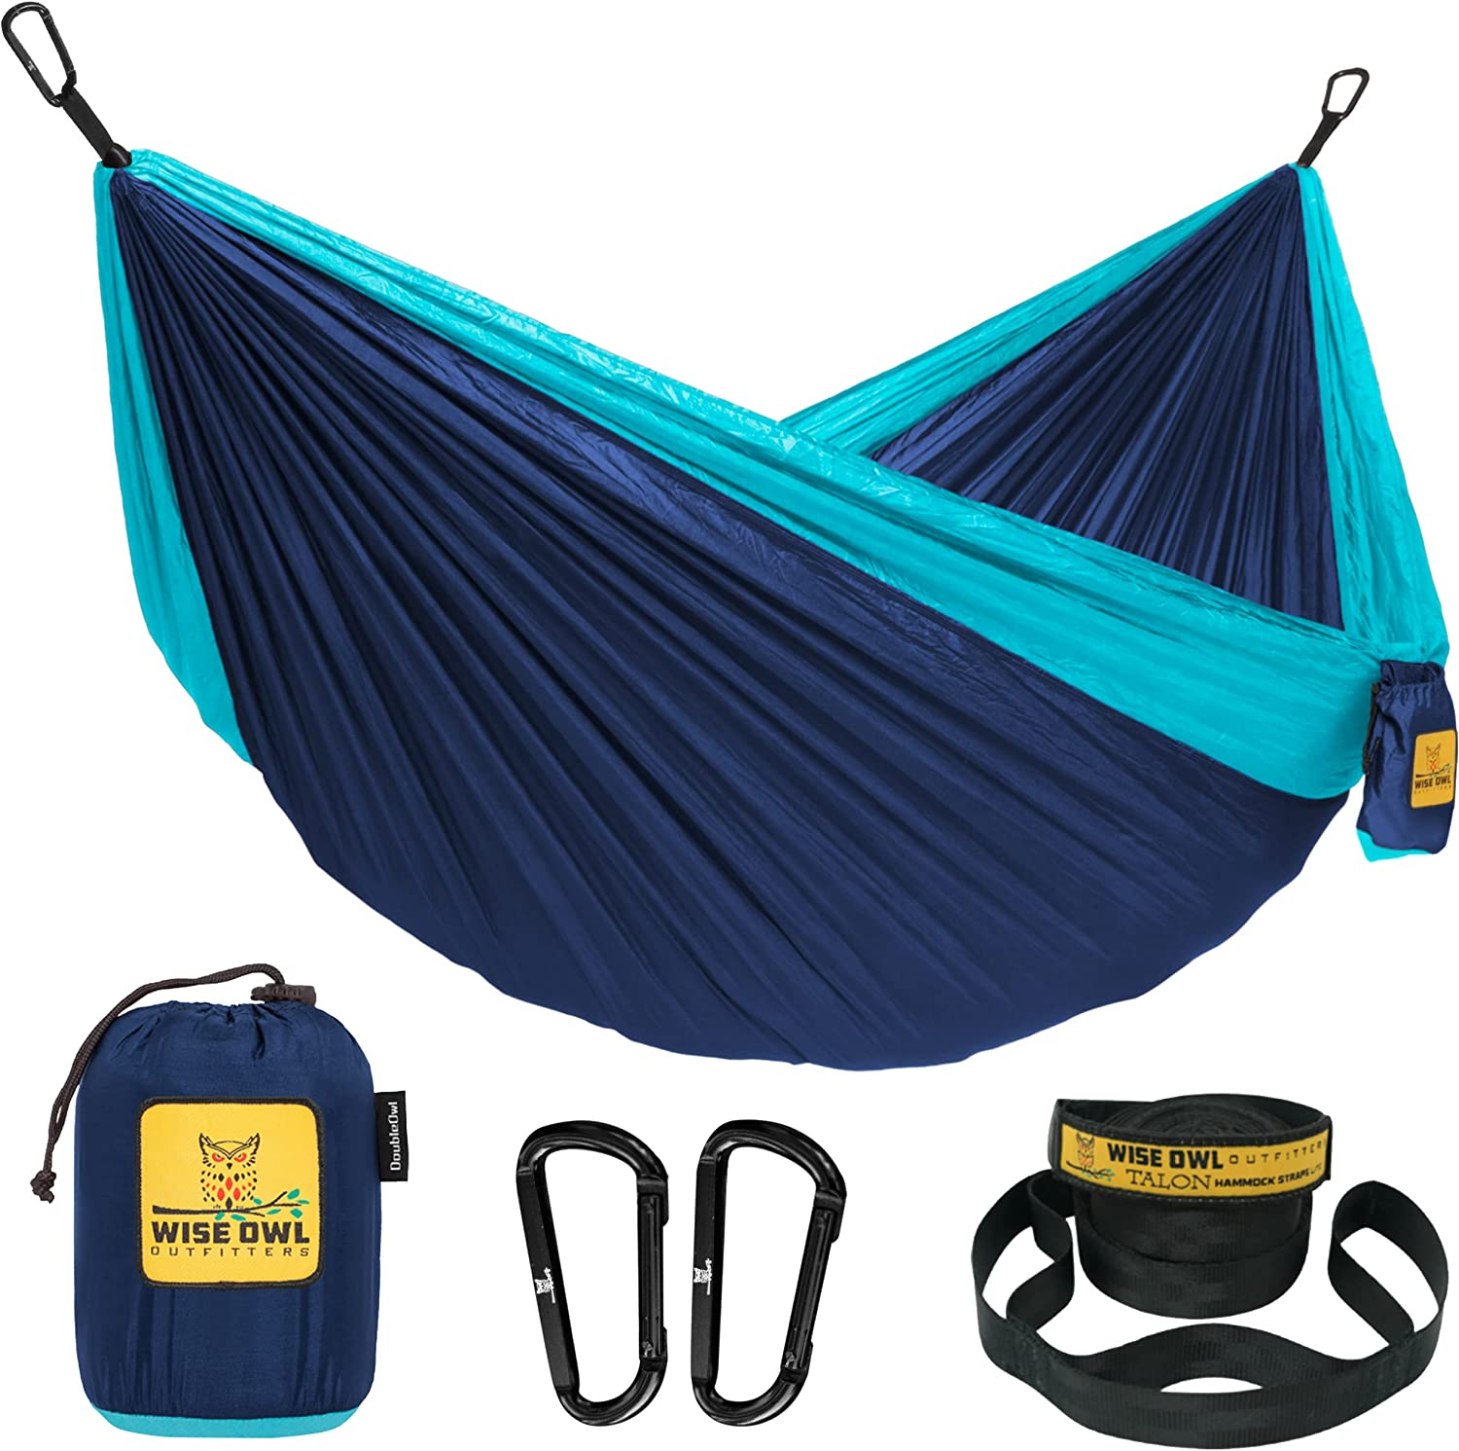 wise owl outfitters portable camping hammock, one of the best gifts for teen boys